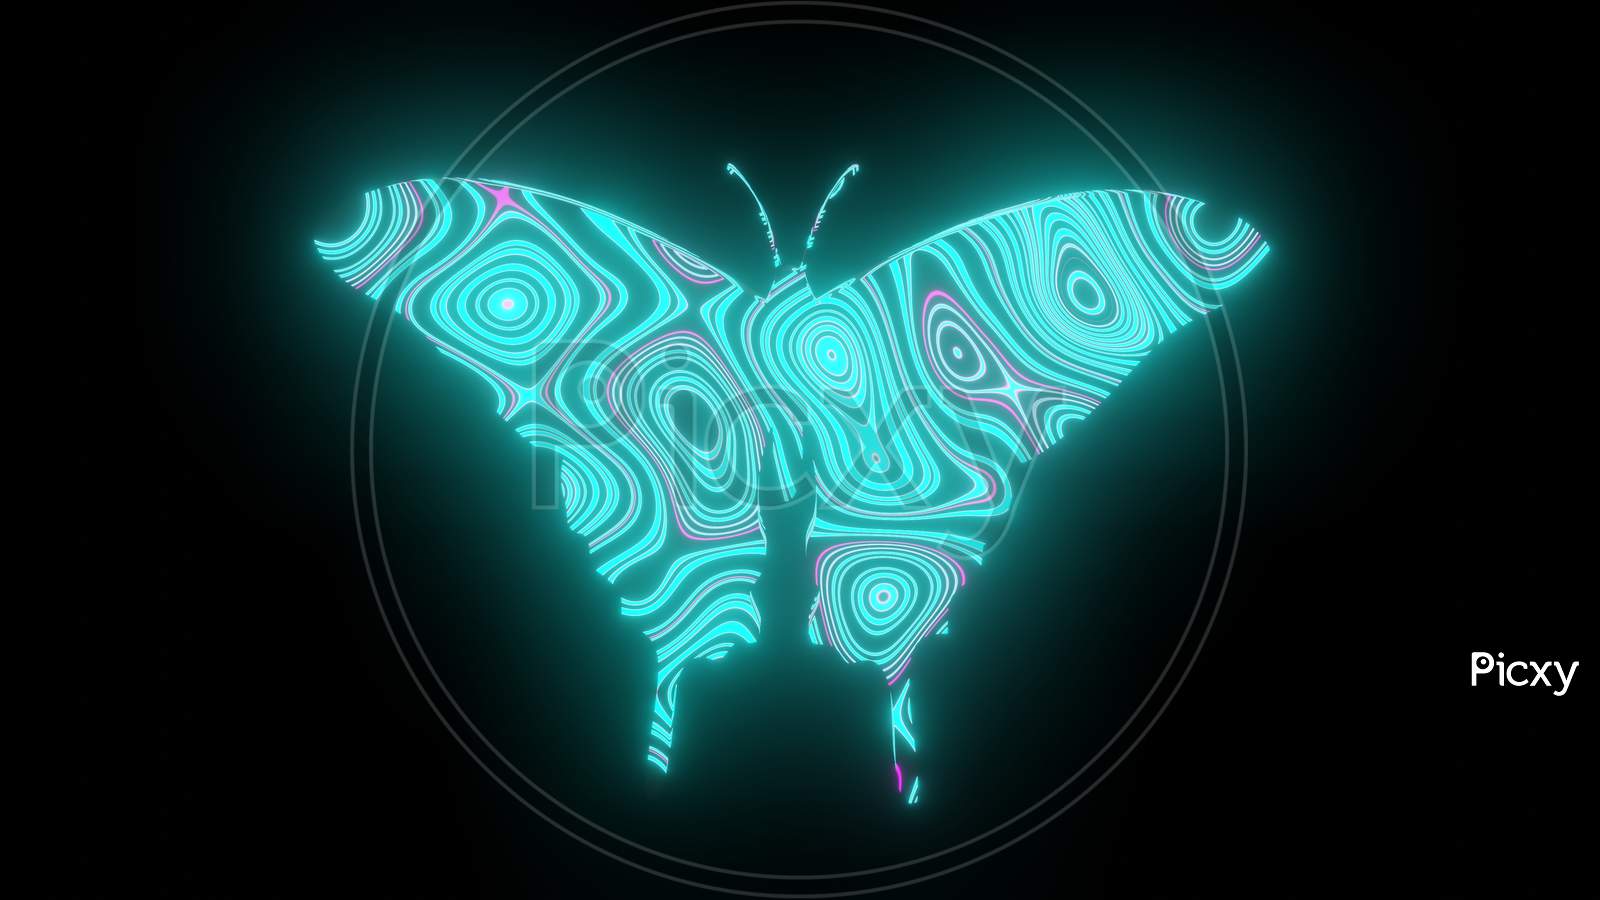 Illustration Graphic Of Beautiful Texture Or Pattern Formation On The Butterfly Body Shape, Isolated On Black Background. 3D Rendering Abstract Loop Neon Lighting Effect On Butterfly.